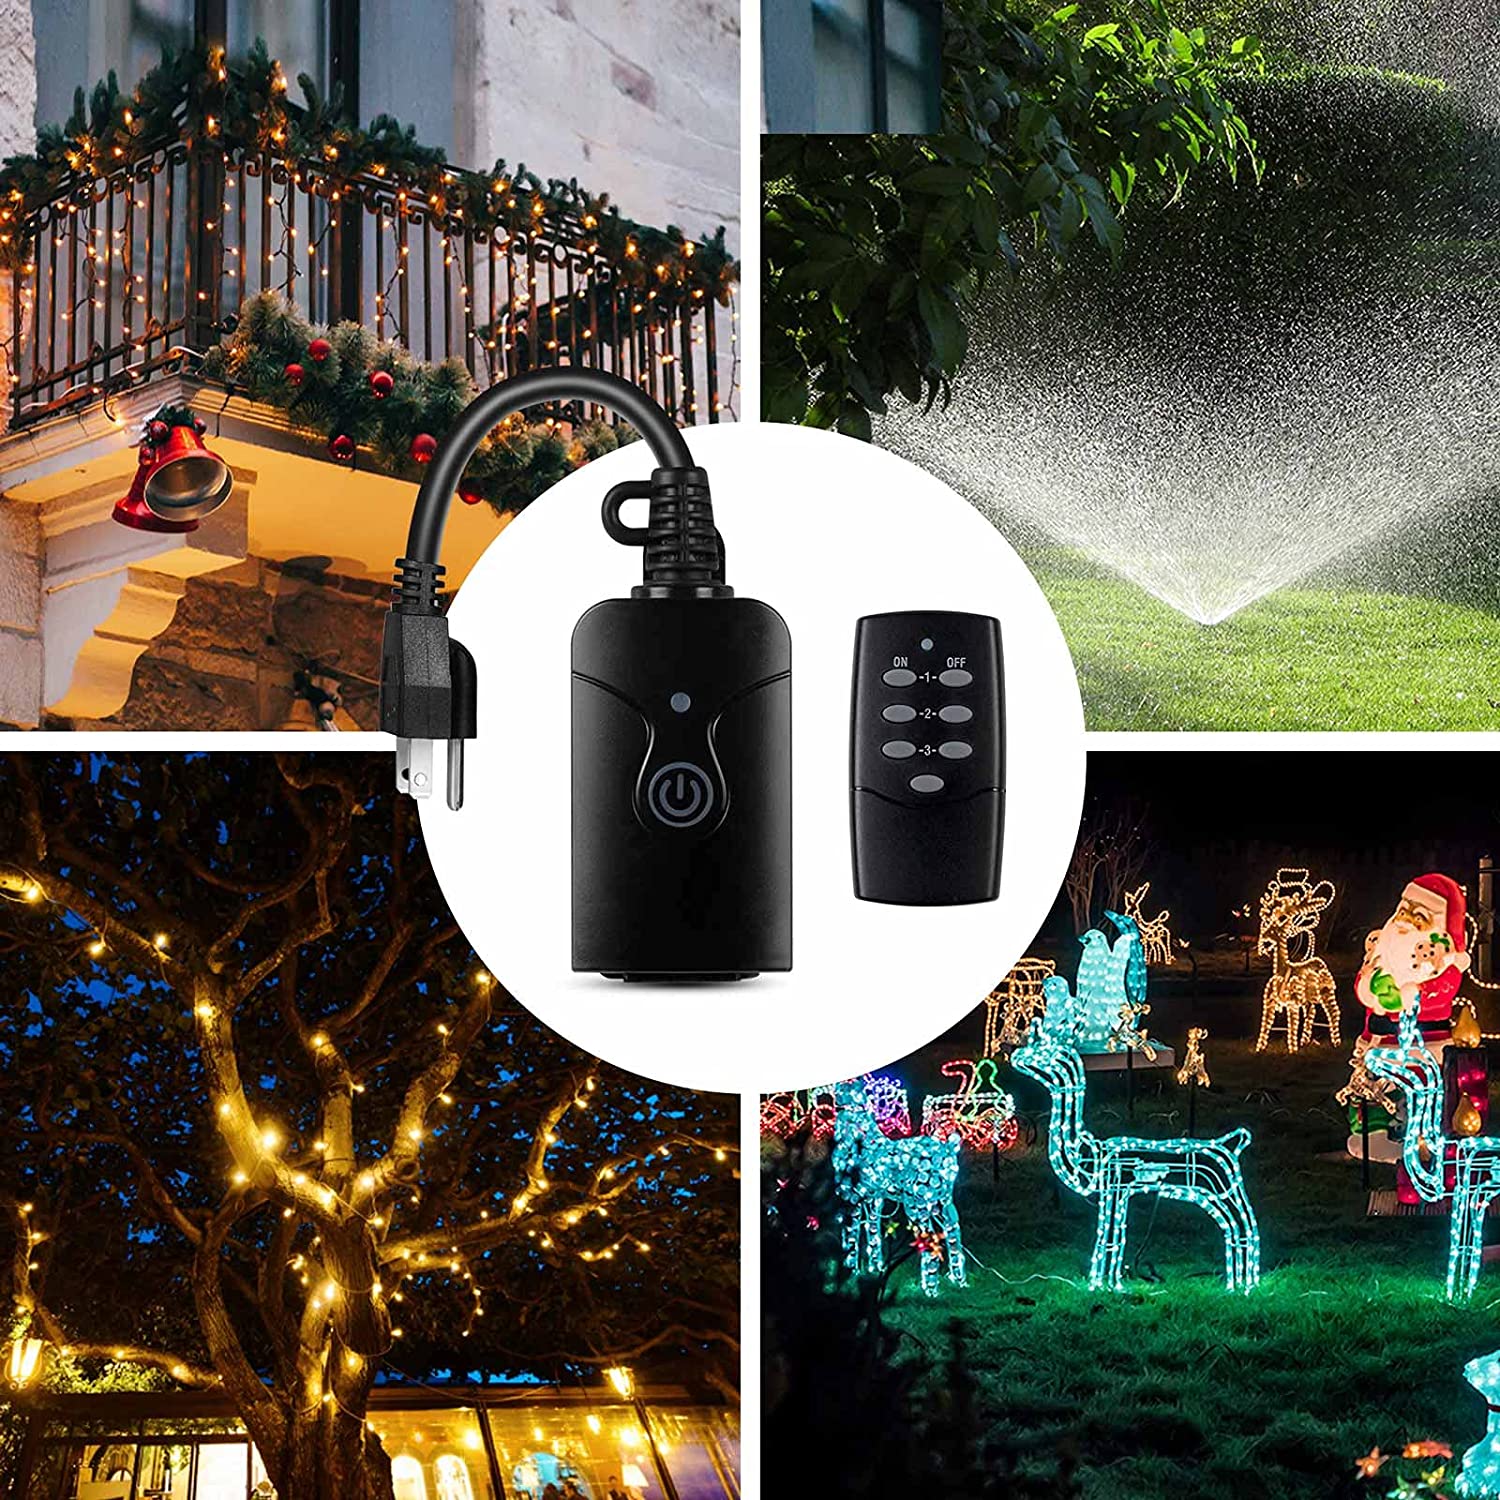 BN-LINK Outdoor Indoor Wireless Remote Control 3-Prong Outlet Weather Proof  Heavy Duty 15 AMP Compact (Black) 3 Grounded Outlets with Remote 6-inch